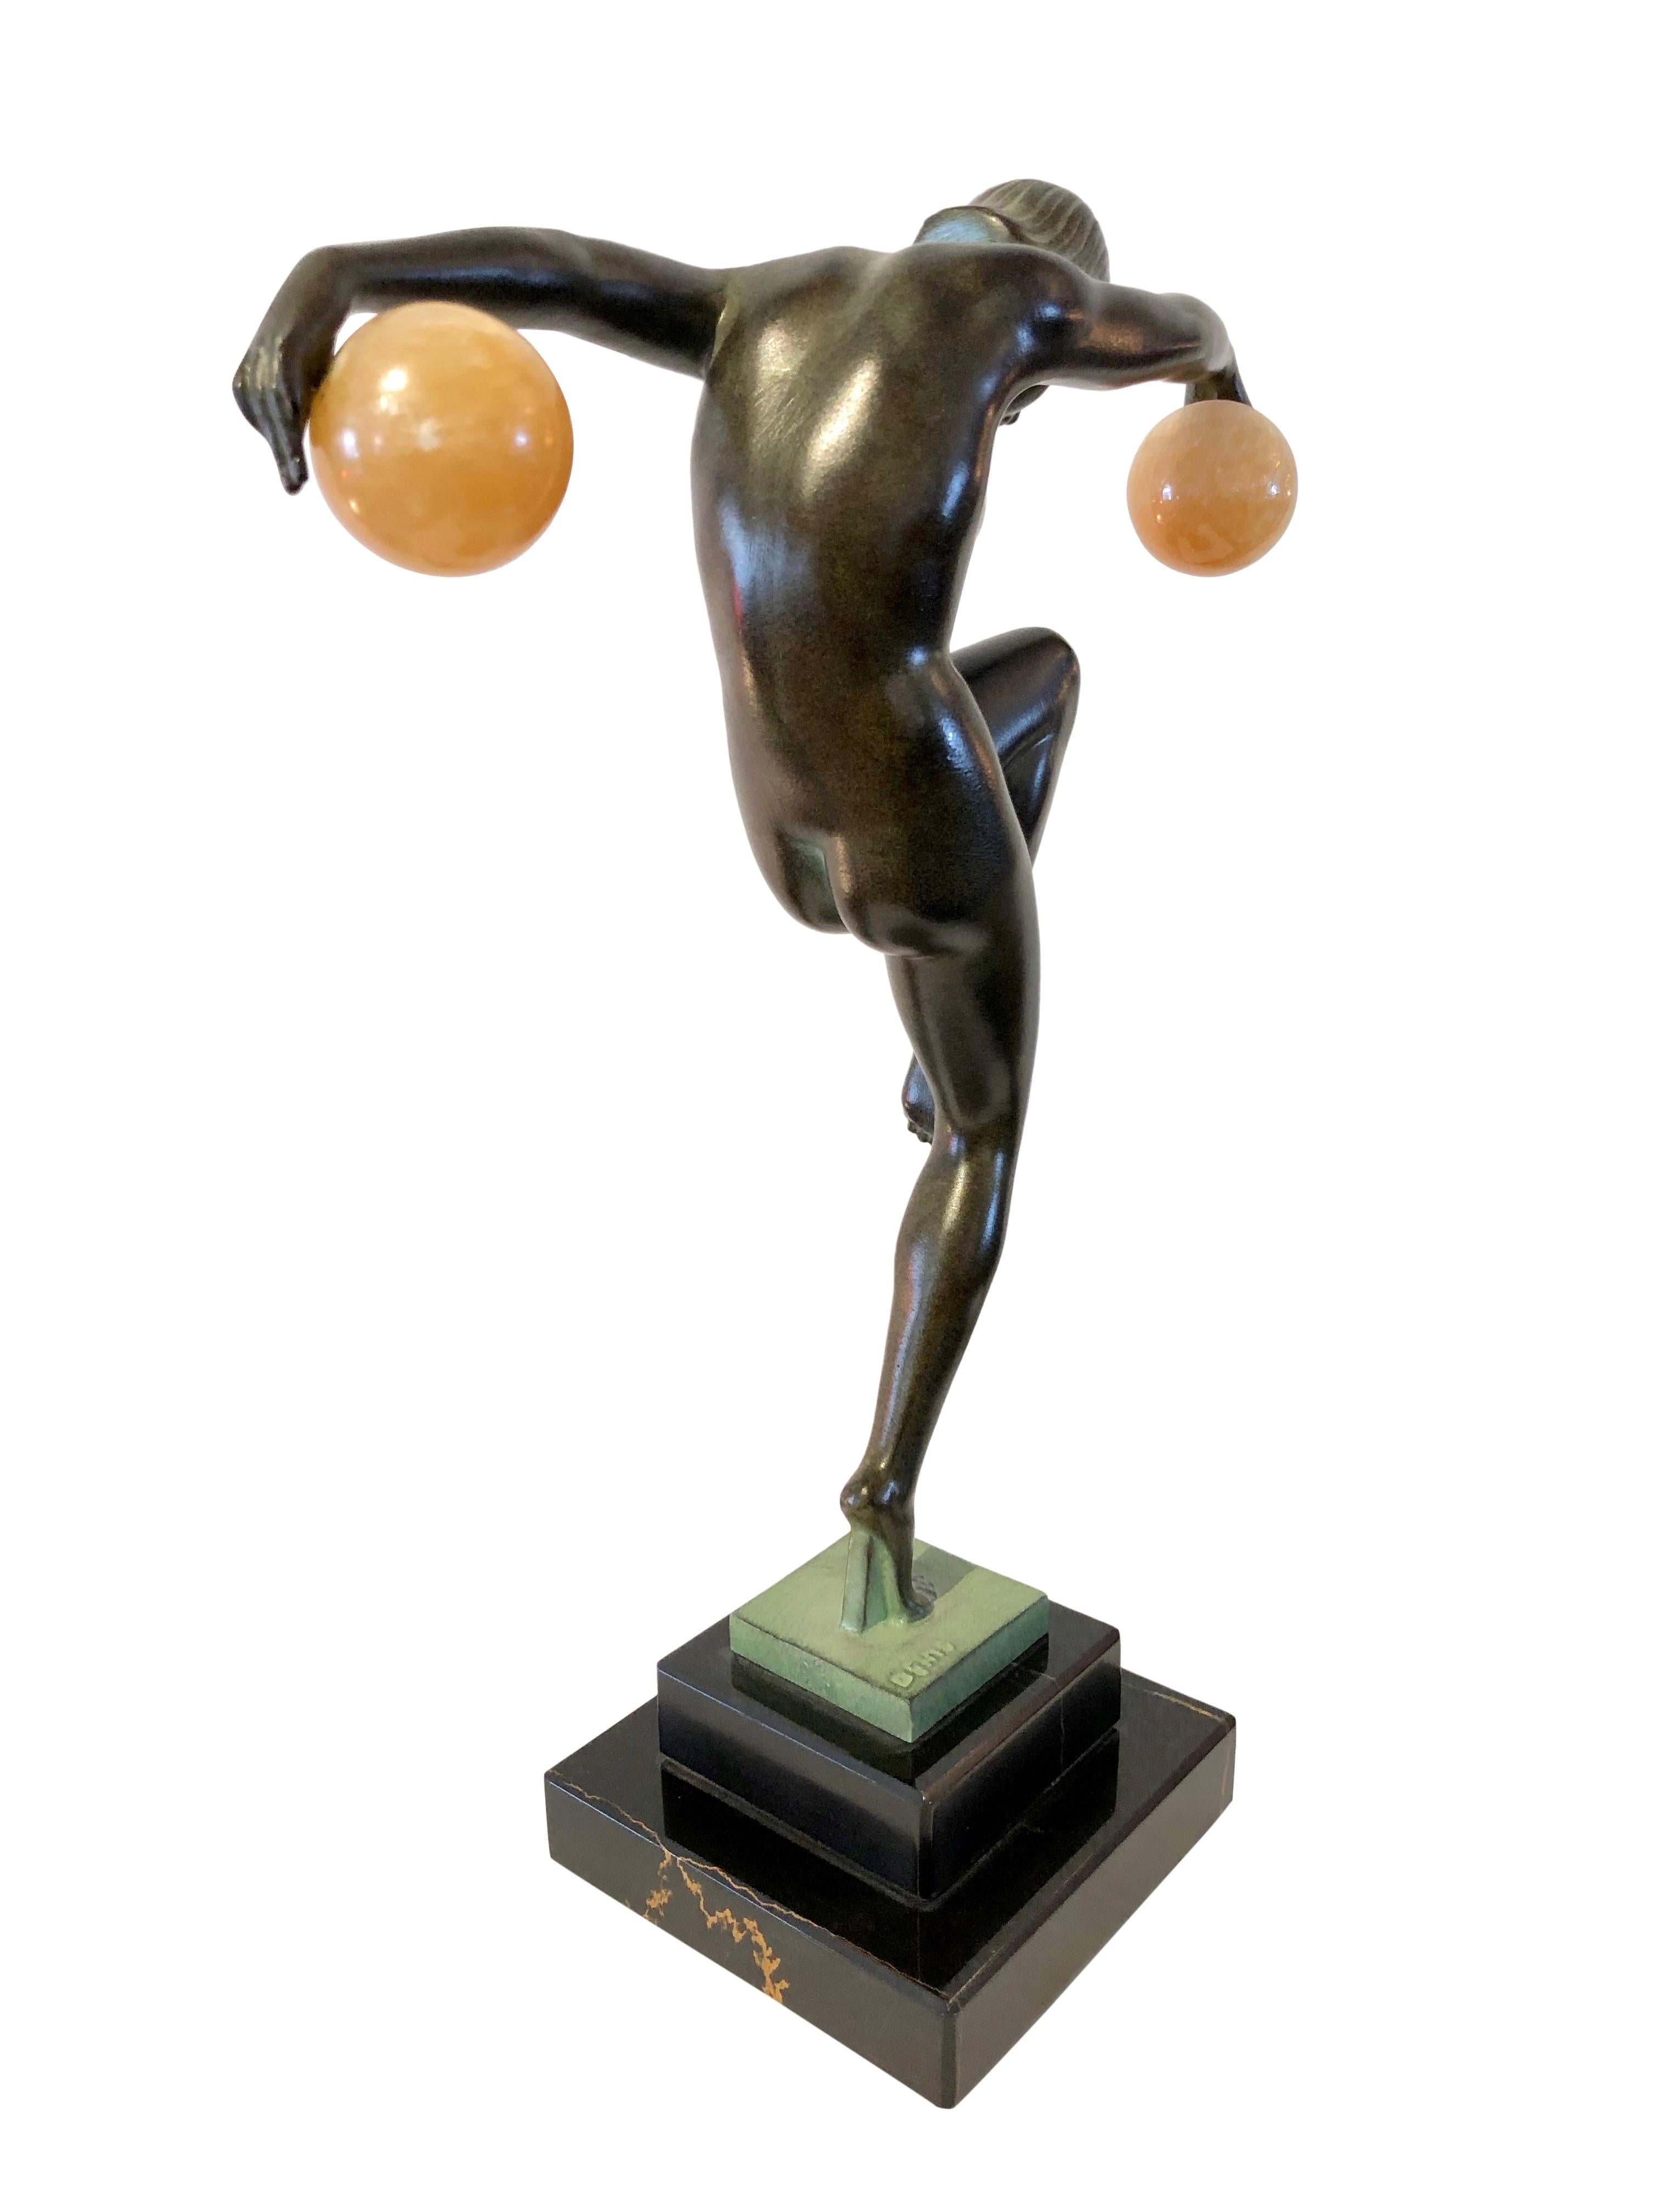 Contemporary Danseuse Aux Boules French Sculpture in Spelter by Denis for Max Le Verrier